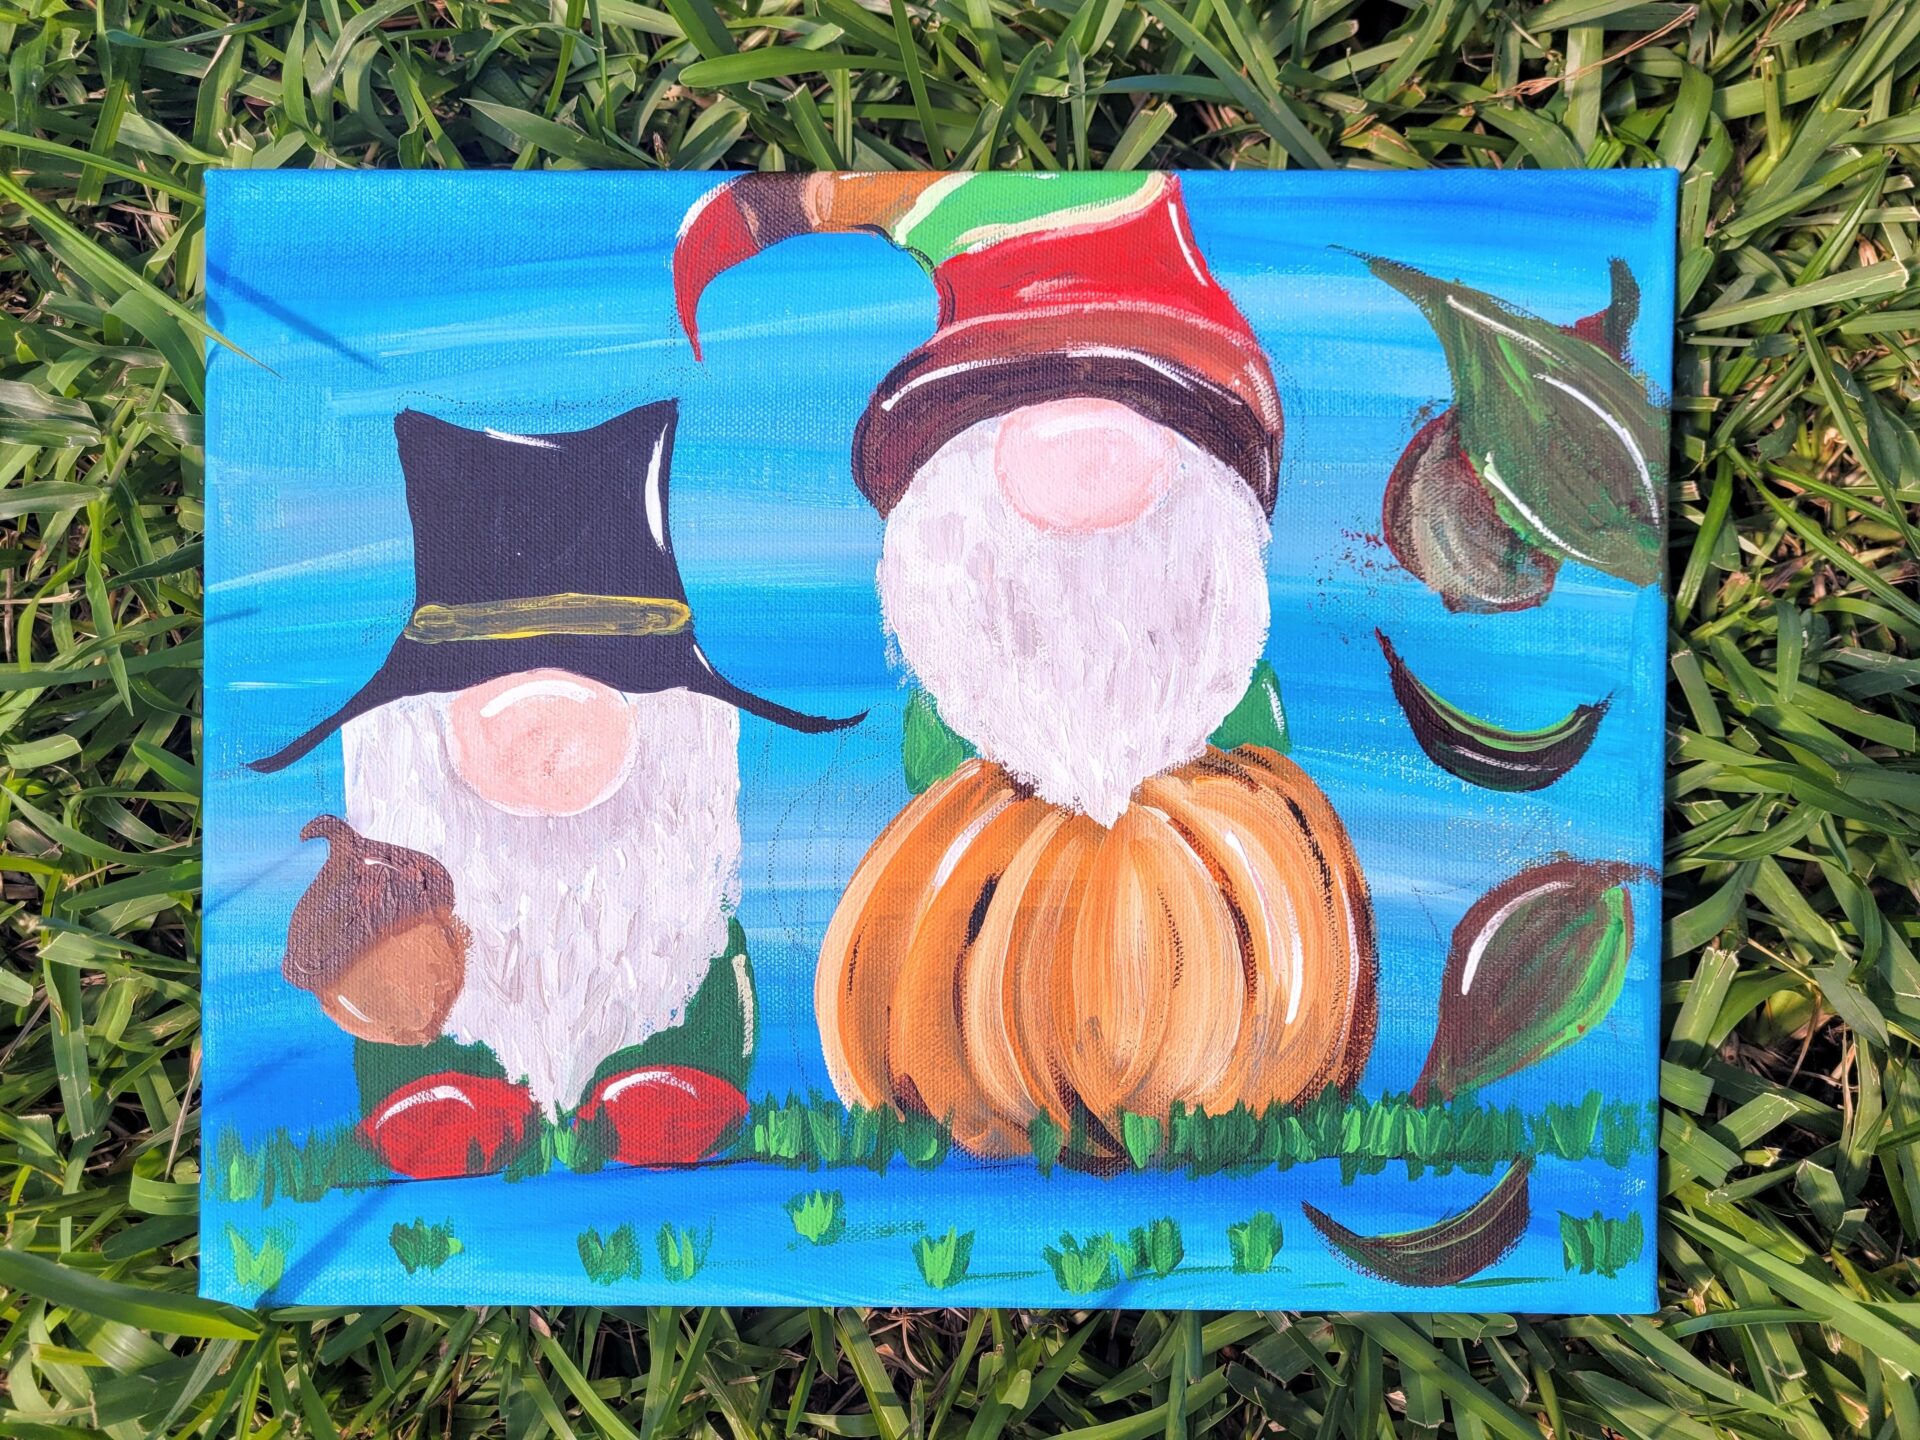 A Painting About Garden Gnomes on Canvas on Grass